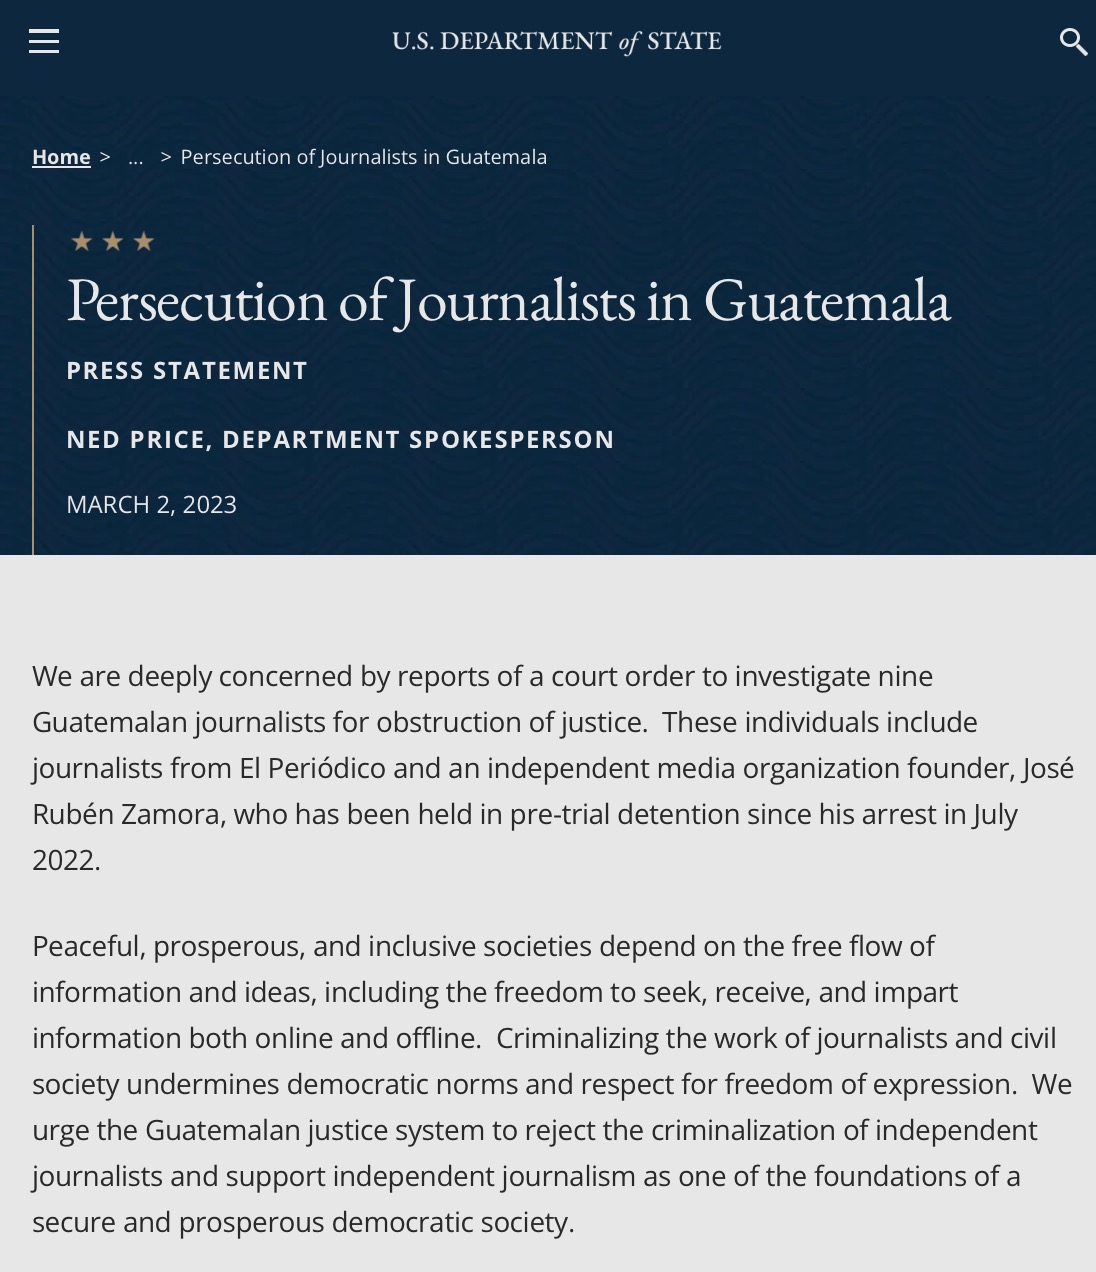 From Department of State:

Persecution of Journalists in Guatemala
PRESS STATEMENT

NED PRICE, DEPARTMENT SPOKESPERSON

MARCH 2, 2023

We are deeply concerned by reports of a court order to investigate nine Guatemalan journalists for obstruction of justice.  These individuals include journalists from El Periódico and an independent media organization founder, José Rubén Zamora, who has been held in pre-trial detention since his arrest in July 2022.

Peaceful, prosperous, and inclusive societies depend on the free flow of information and ideas, including the freedom to seek, receive, and impart information both online and offline.  Criminalizing the work of journalists and civil society undermines democratic norms and respect for freedom of expression.  We urge the Guatemalan justice system to reject the criminalization of independent journalists and support independent journalism as one of the foundations of a secure and prosperous democratic society.